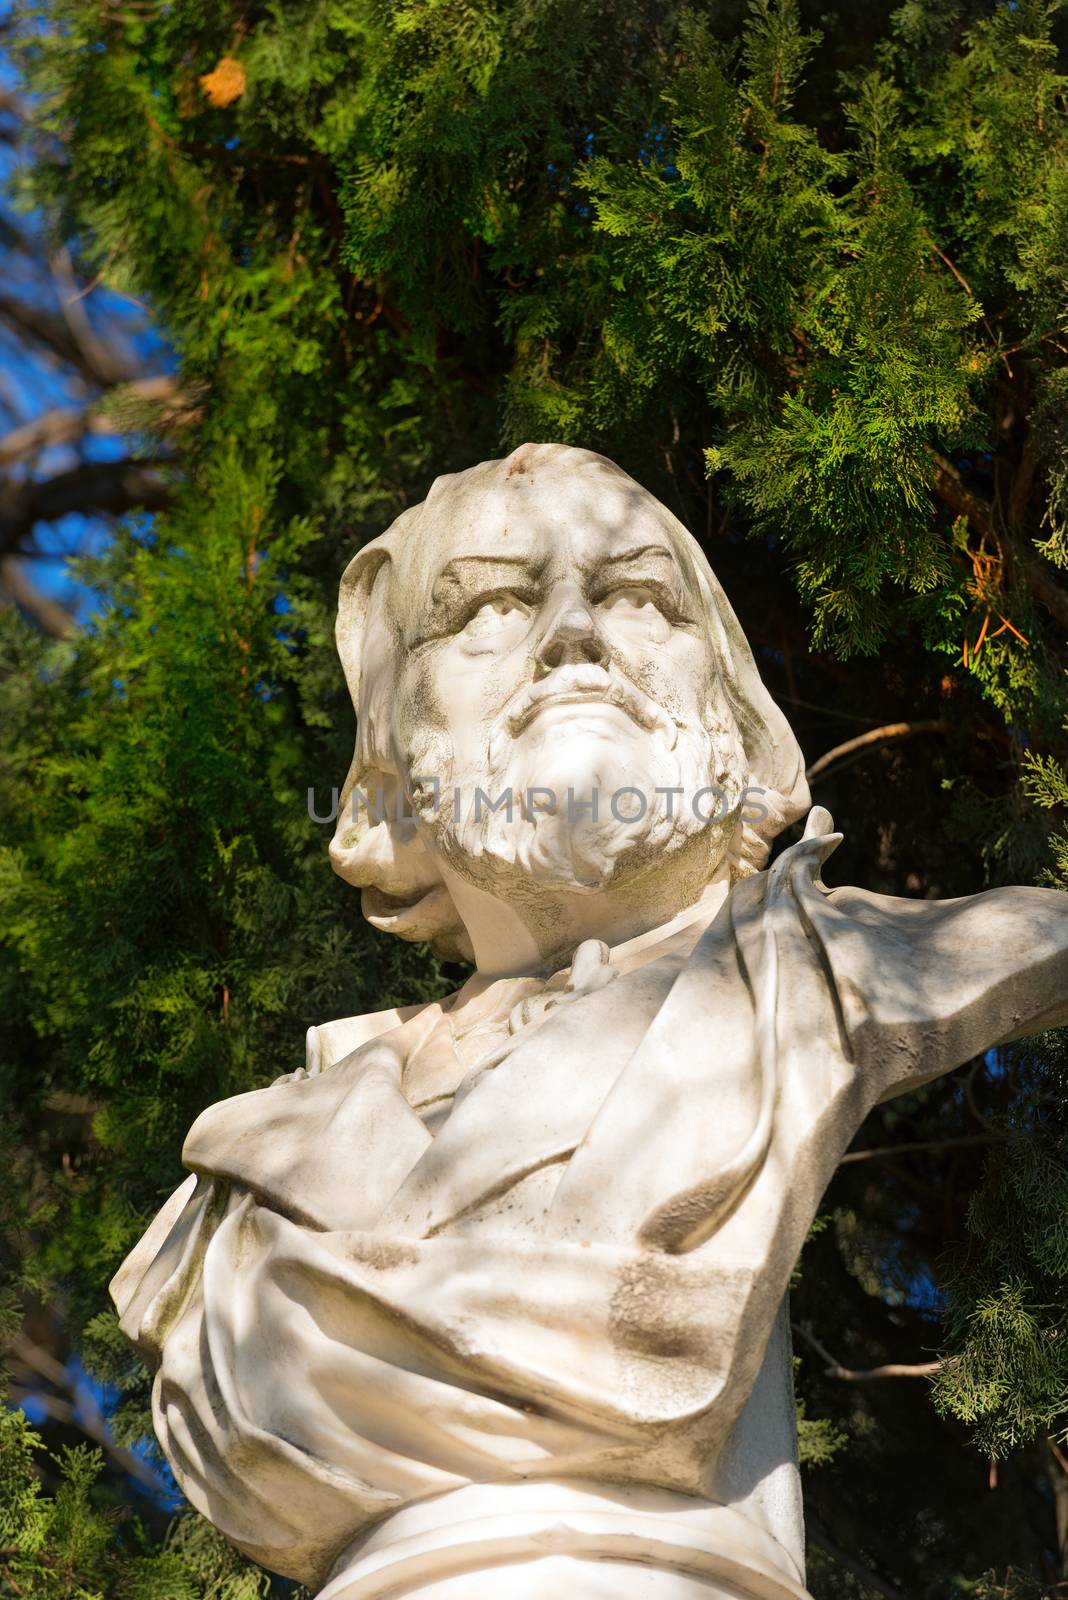 Detail of the marble bust of the Doctor Franz Tappeiner (1816-1902), botanist and anthropologist in Merano, Bolzano, Trentino Alto Adige, Italy